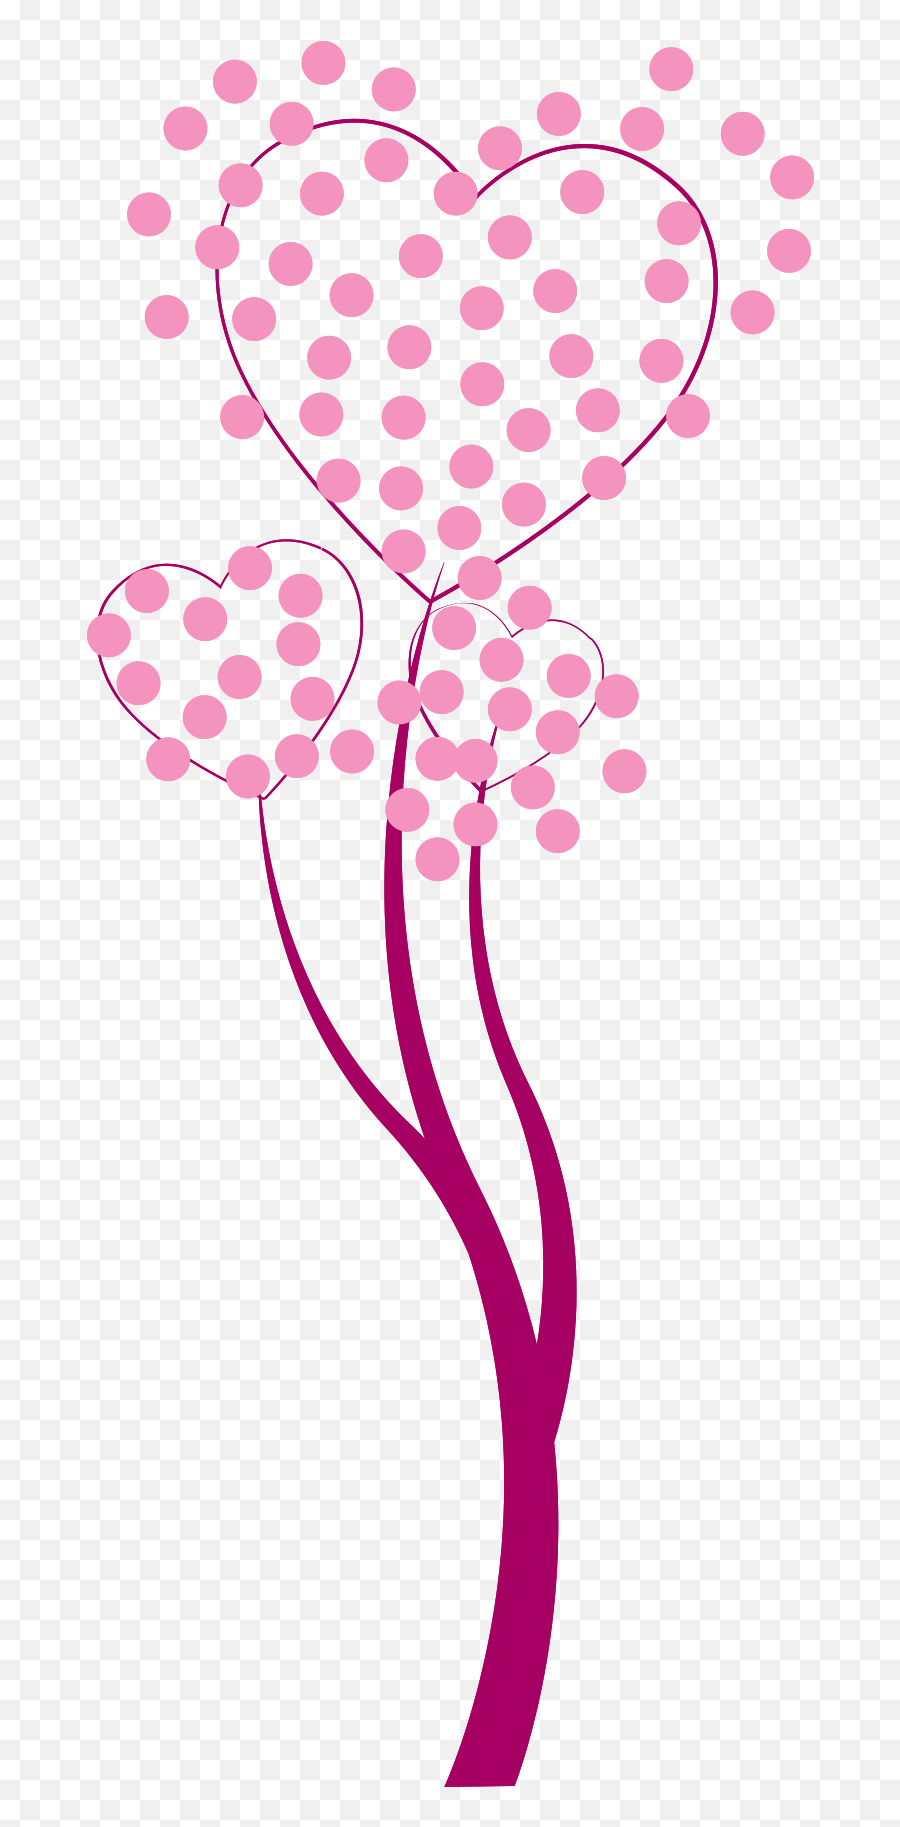 Free Tree Of Hearts Png With Transparent Background - Heart Emoji,Hearts Png